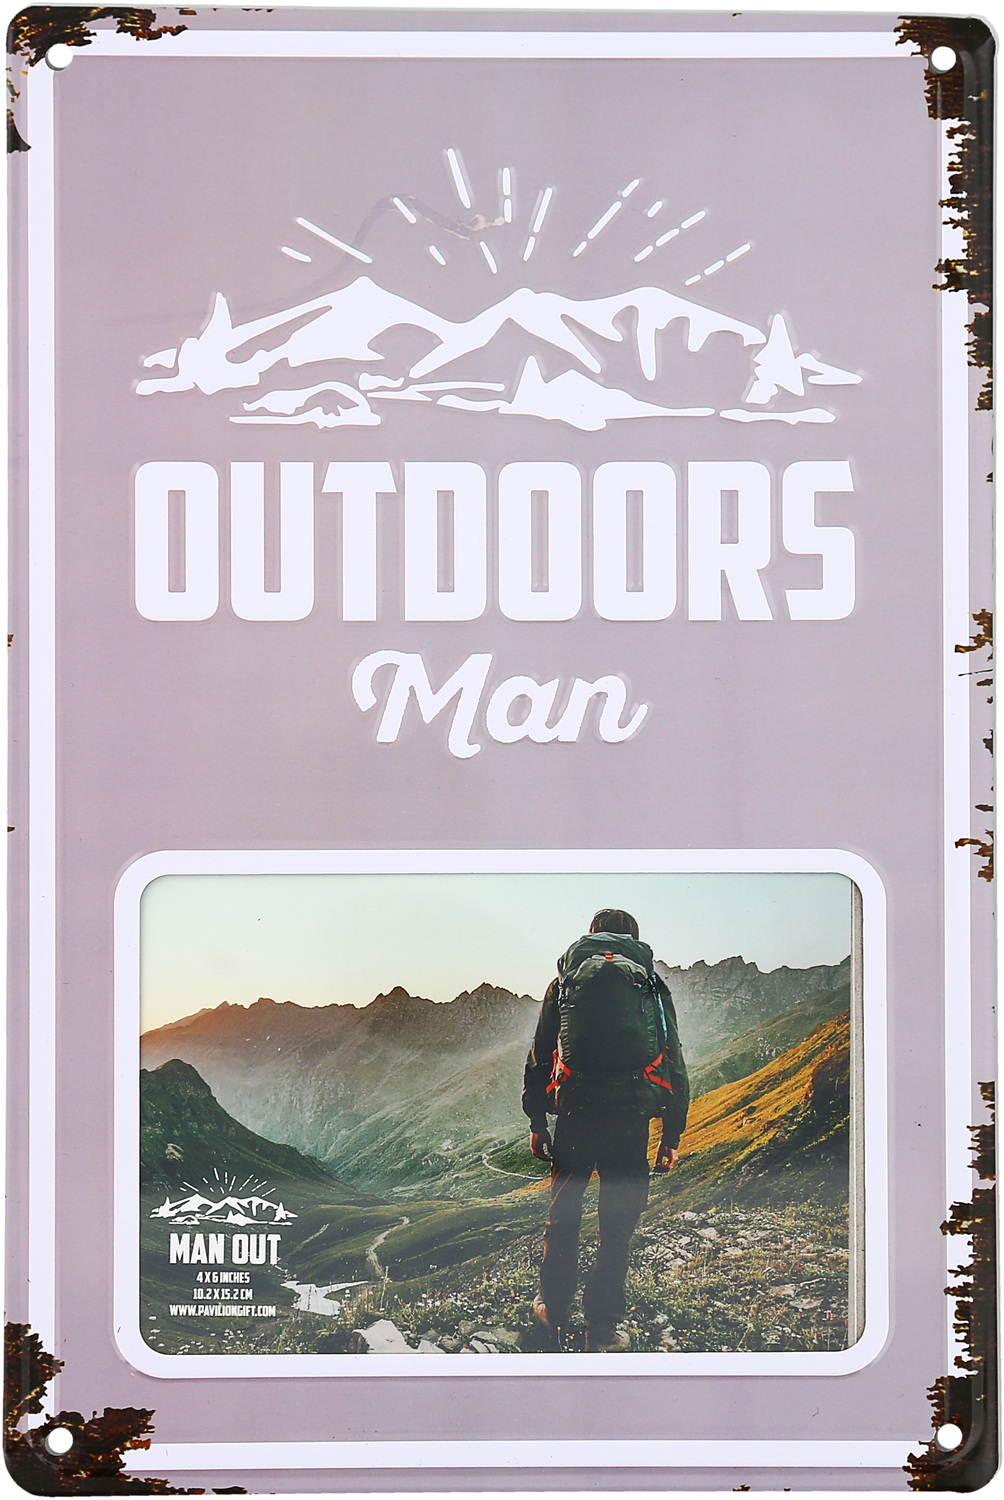 Outdoors Man by Man Out - Outdoors Man - 8" x 11.75" Tin Frame
(Holds 6" x 4" Photo)